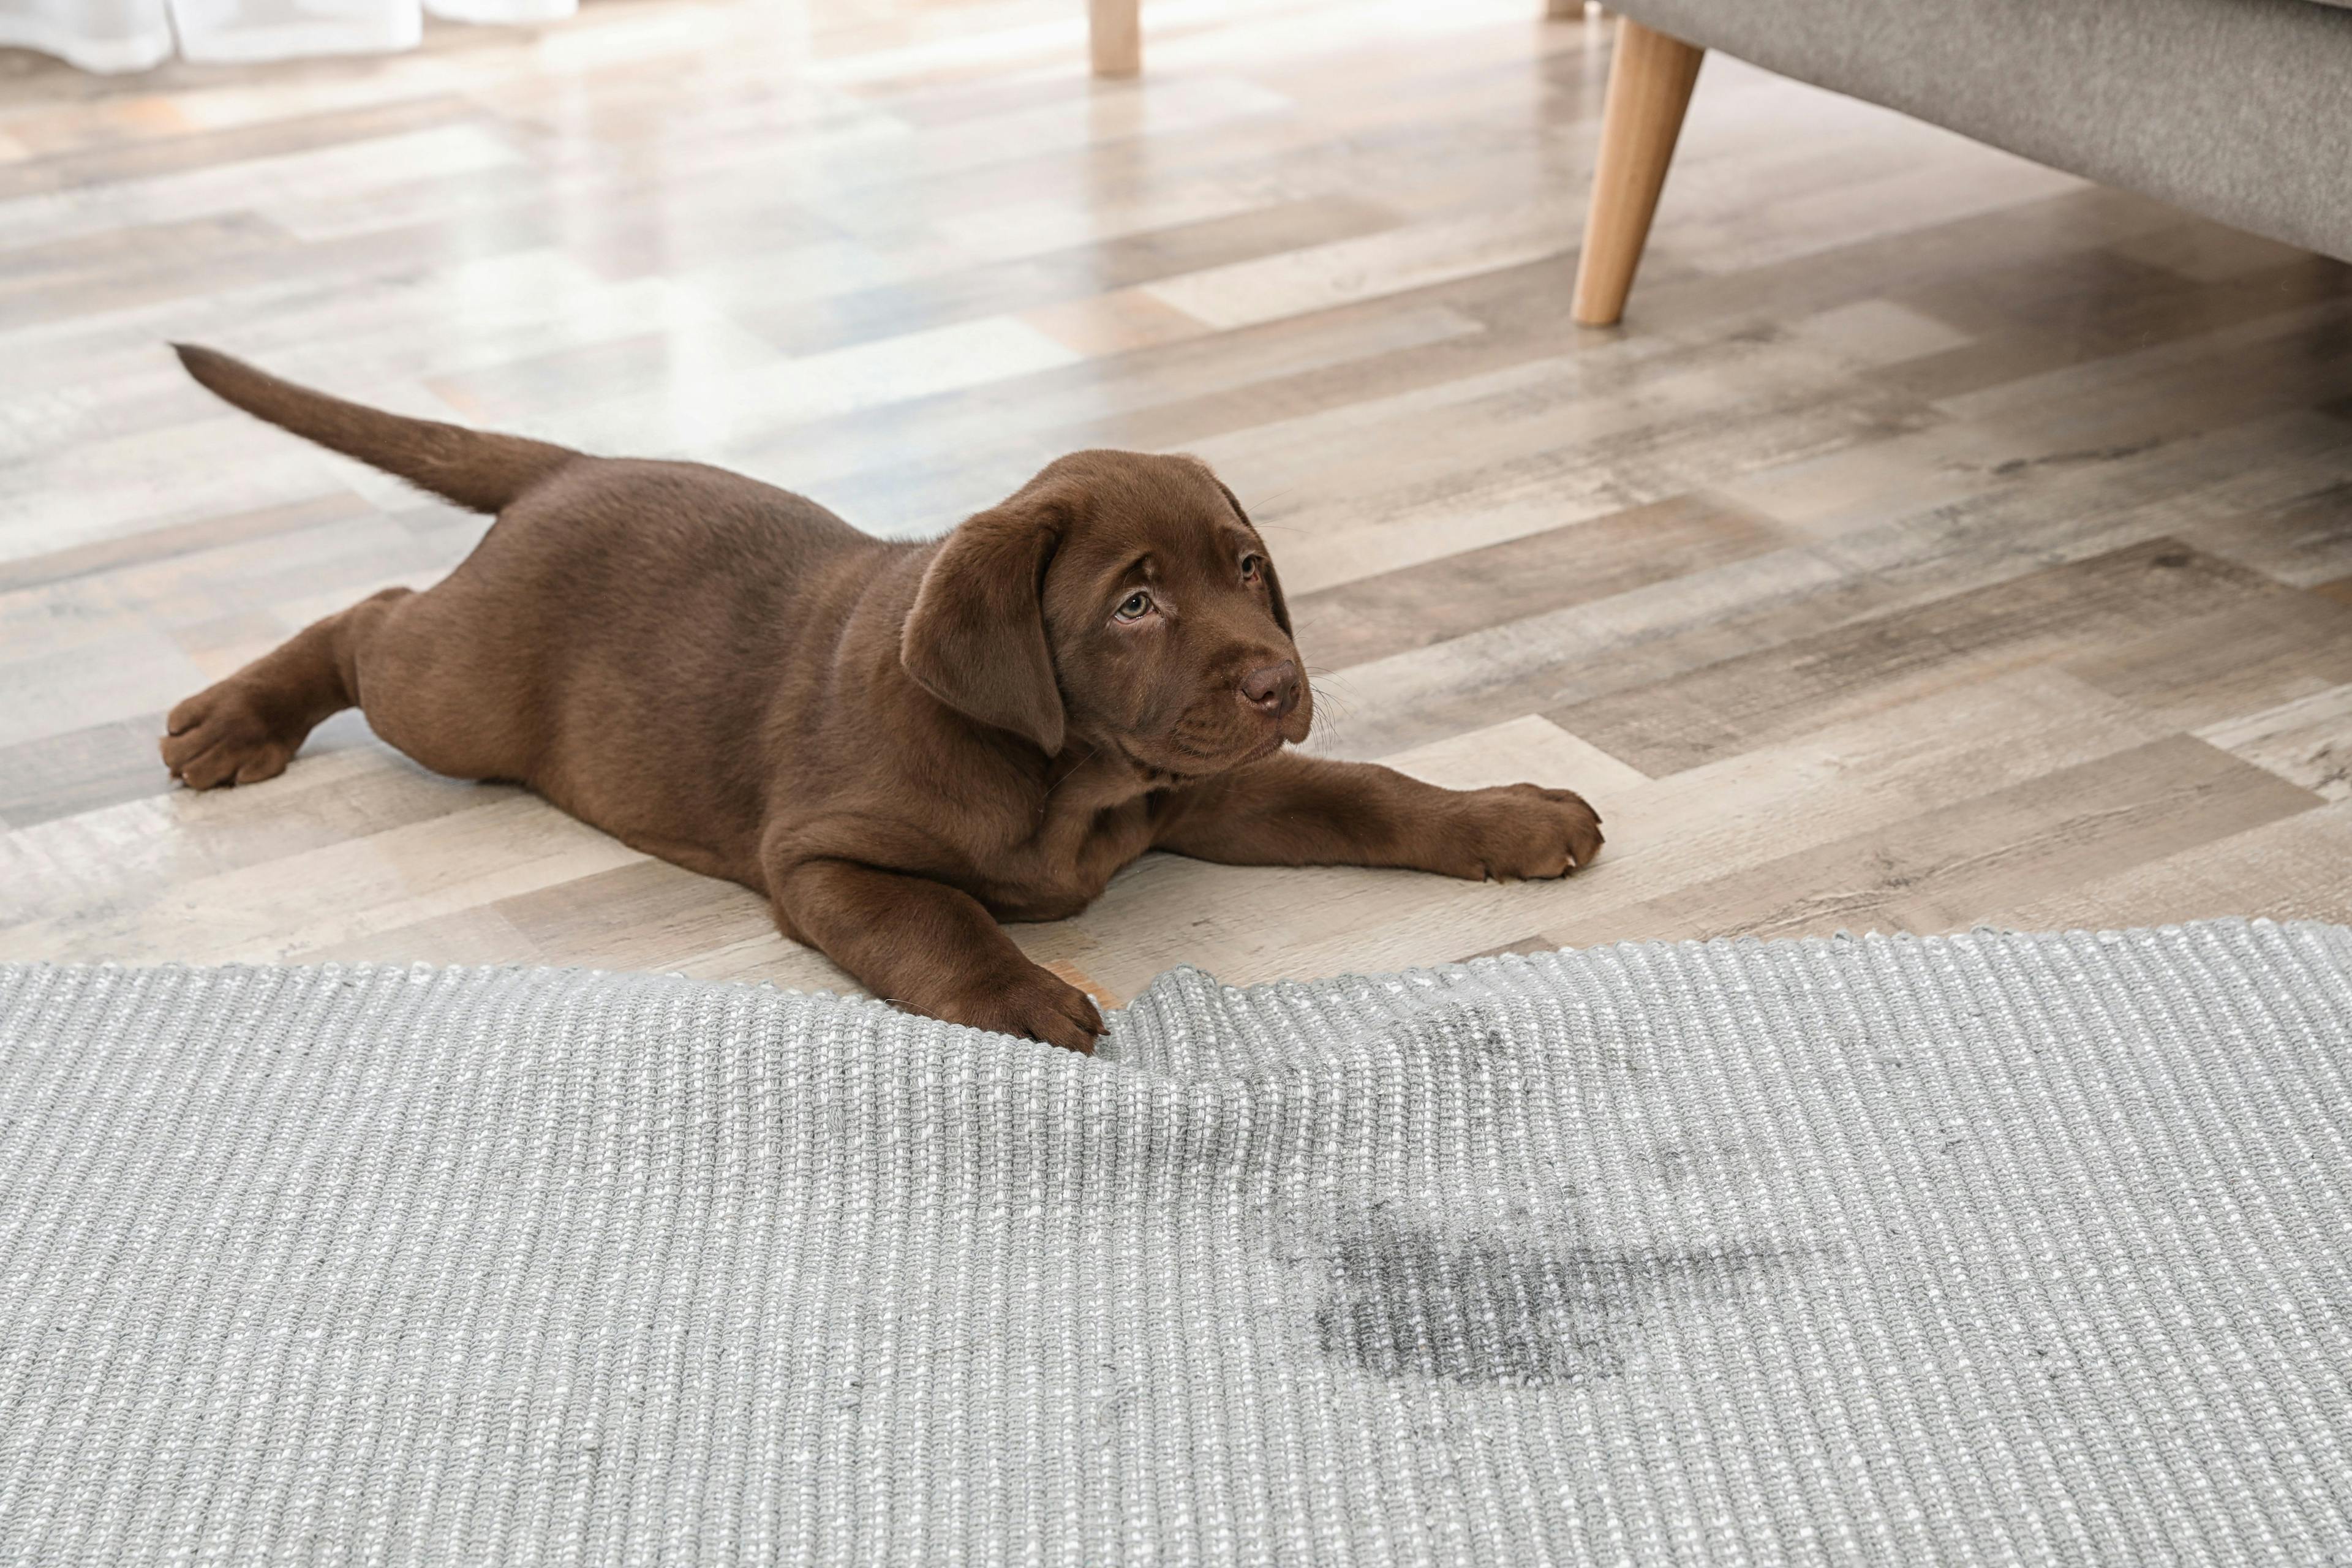 Addressing the hidden defect in the leaky puppy